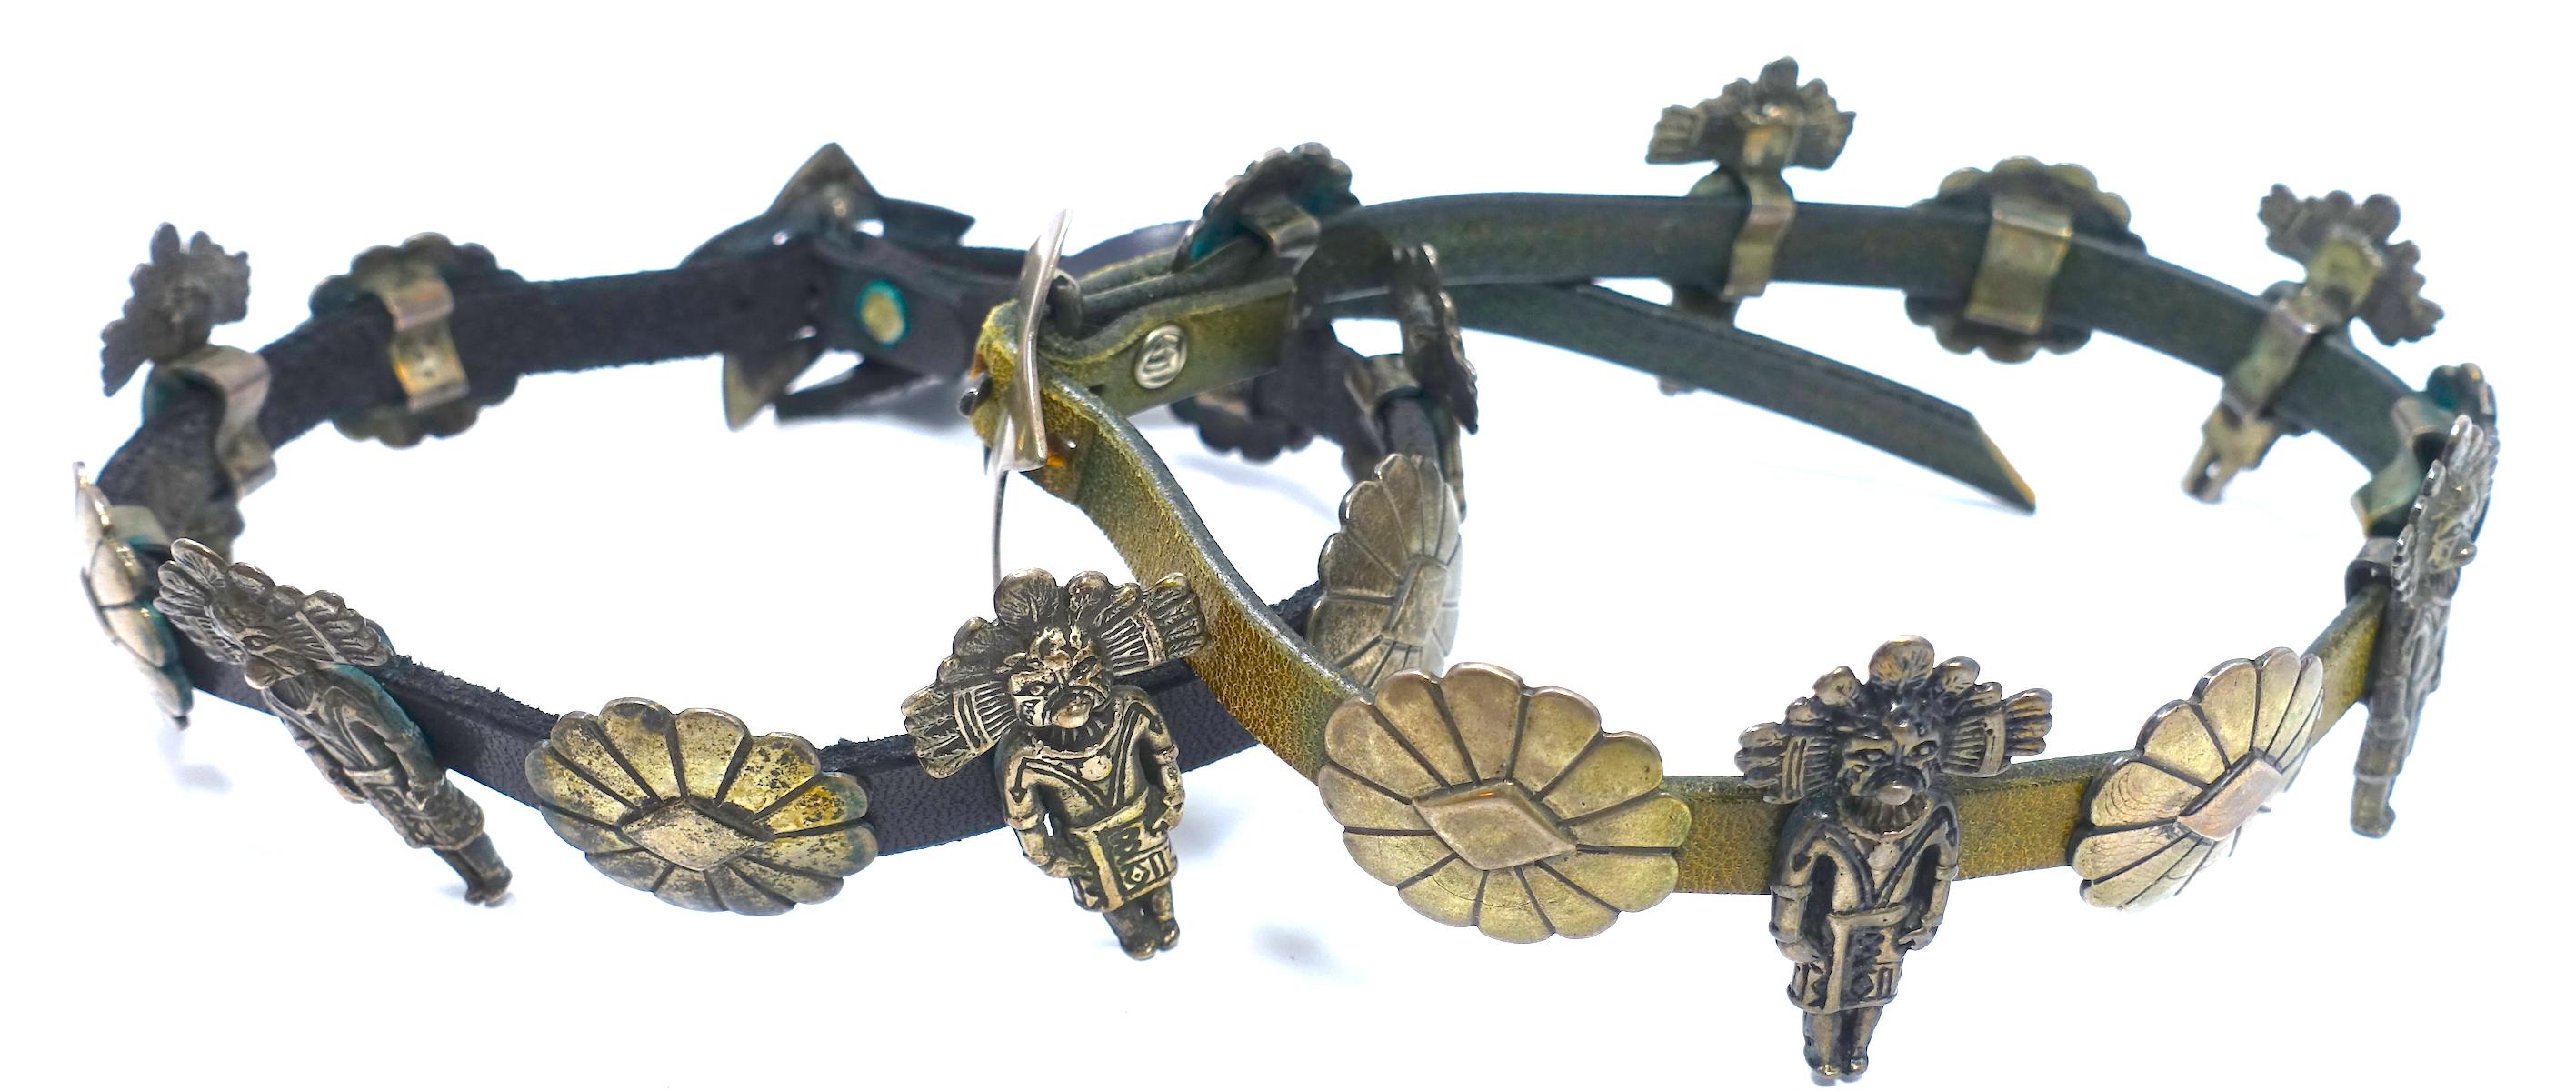 These rare vintage boot jewelry by Arthur Goldstein feature American Indian images in sterling silver. One strap is black leather and the other is a peridot green.  In excellent condition, each strap measures 20” x 1-1/2” and bears the “Arthur